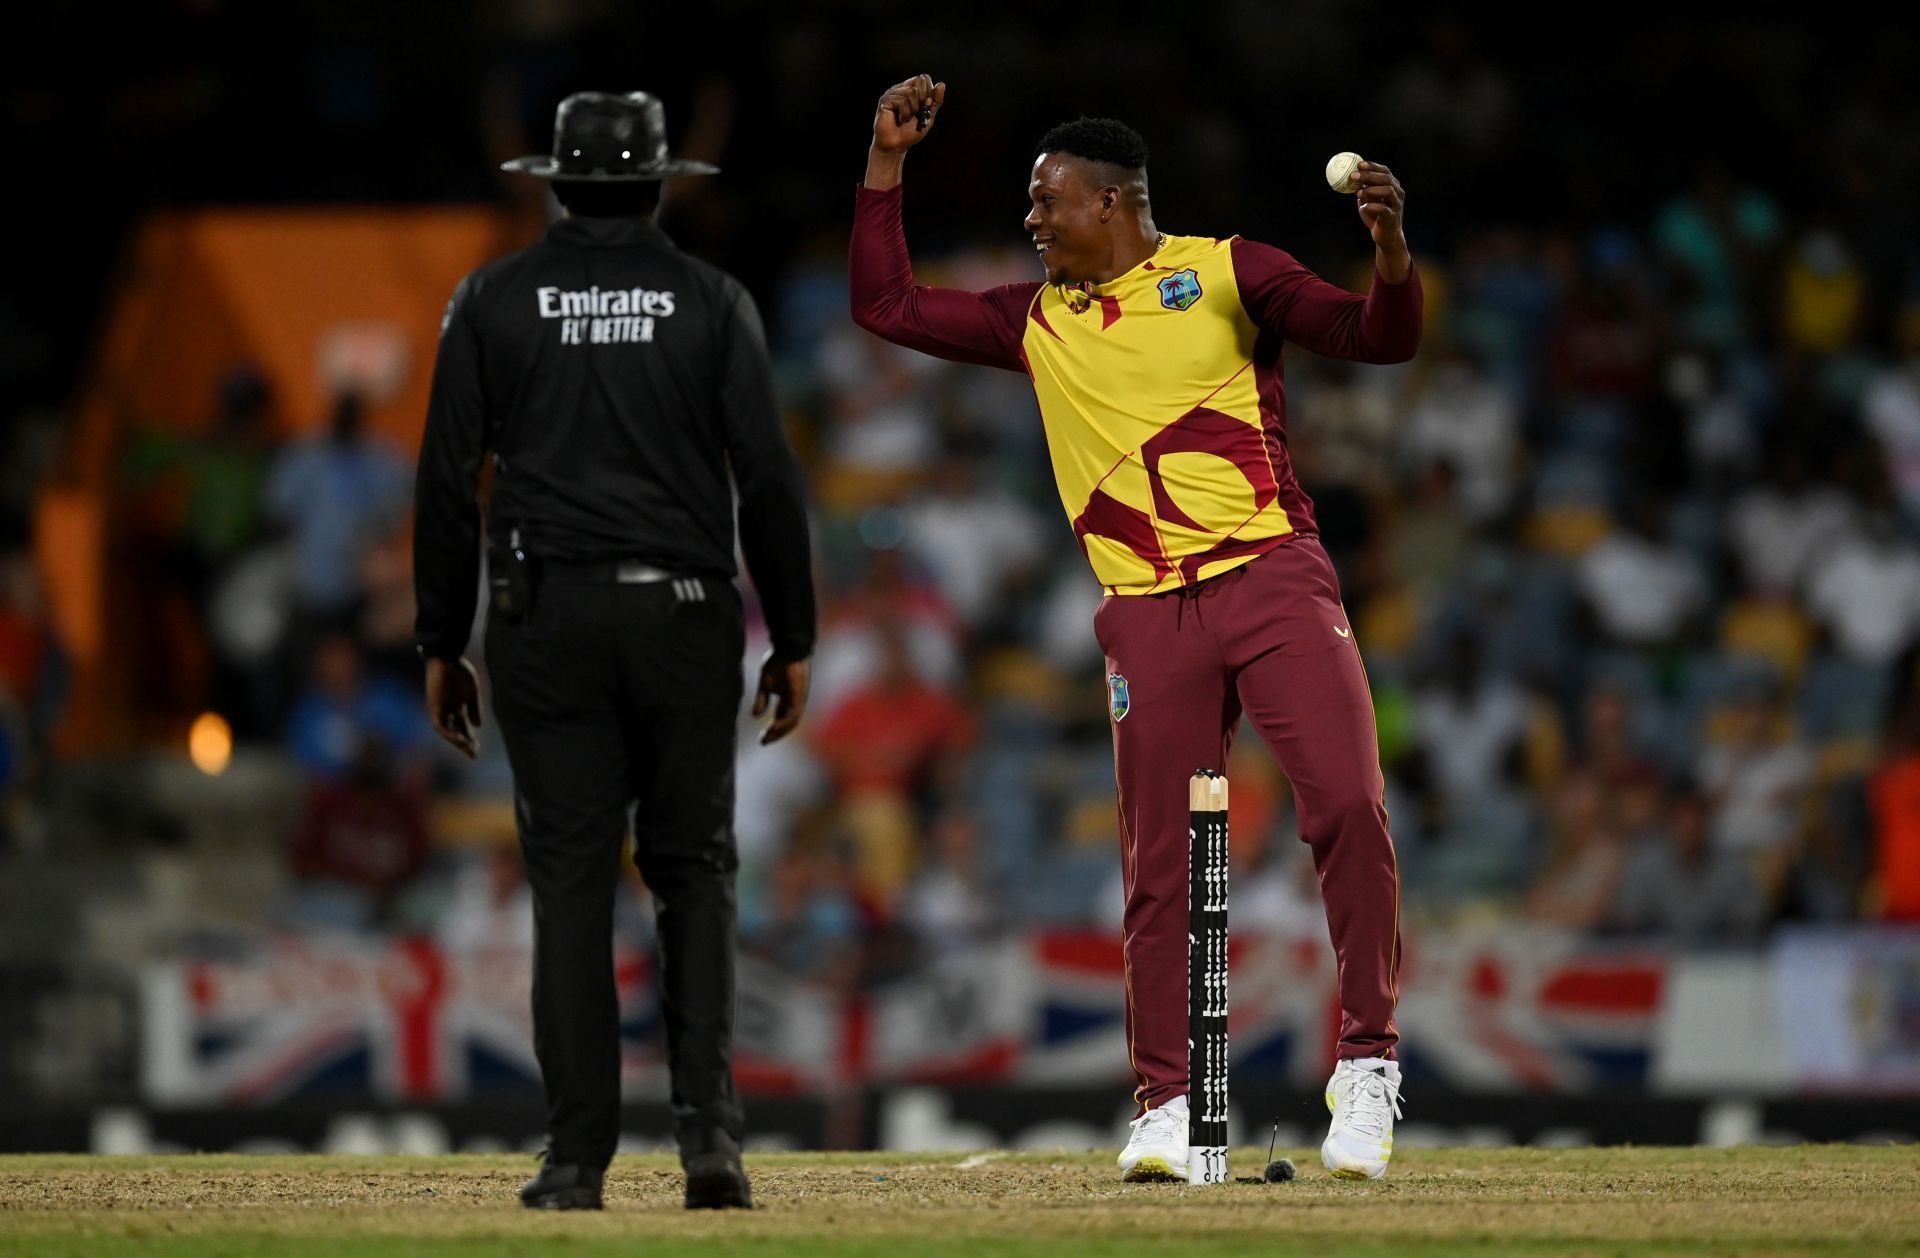 Sheldon Cottrell is a wicket-taking option for the Windies in power-play overs